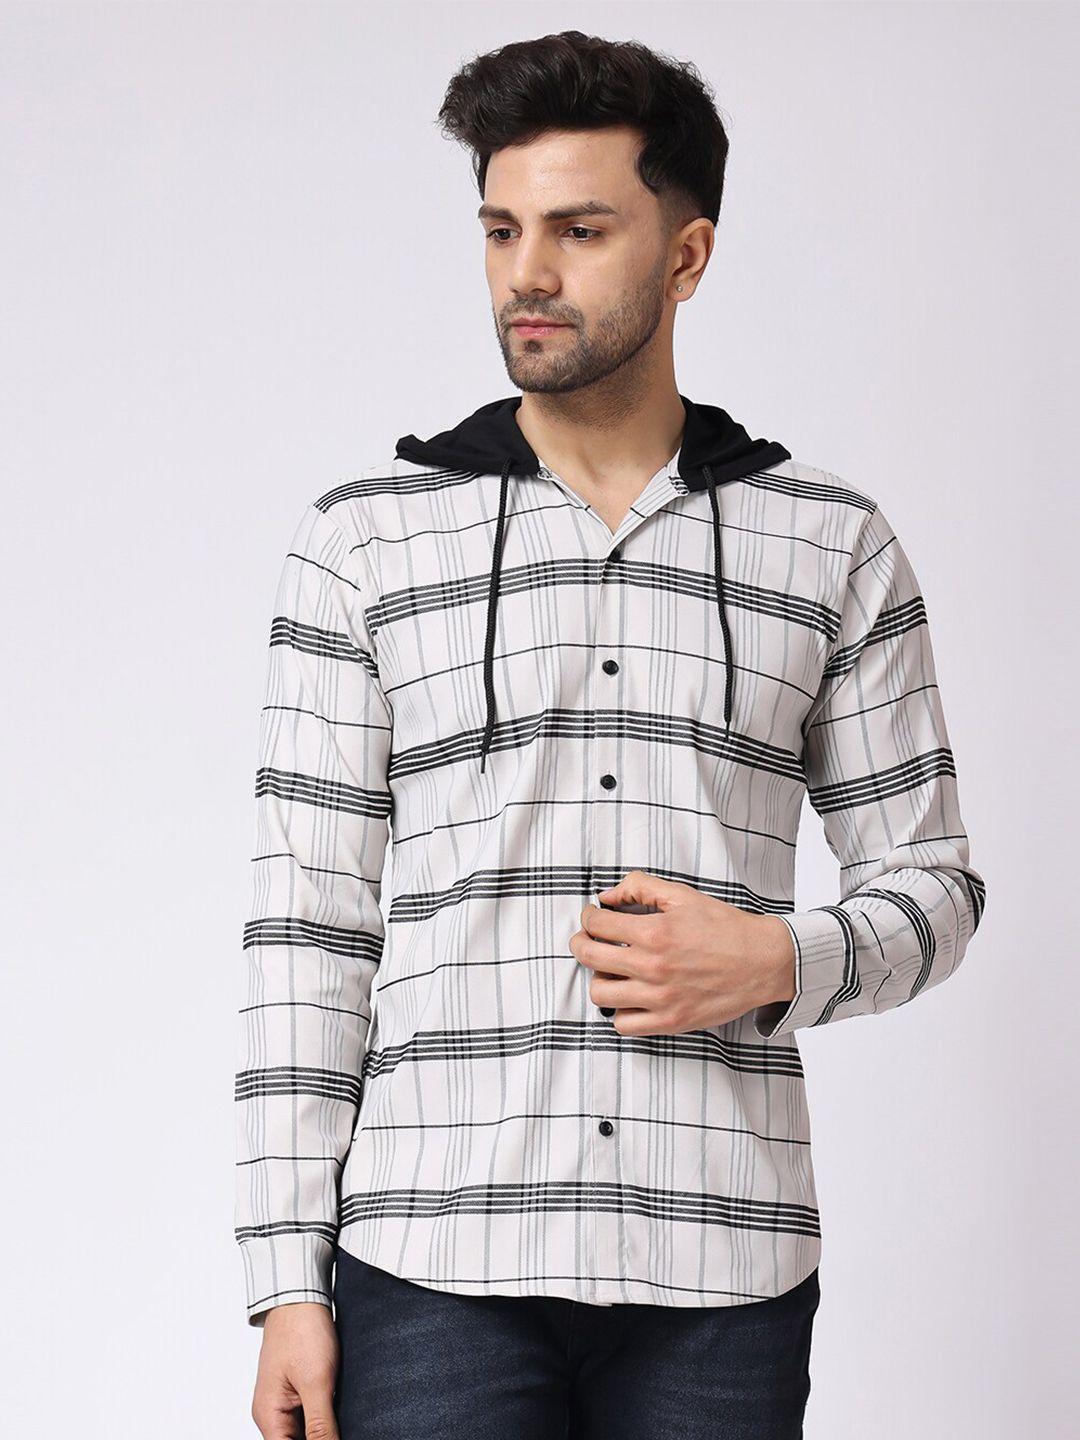 voroxy men silver-toned opaque checked casual shirt